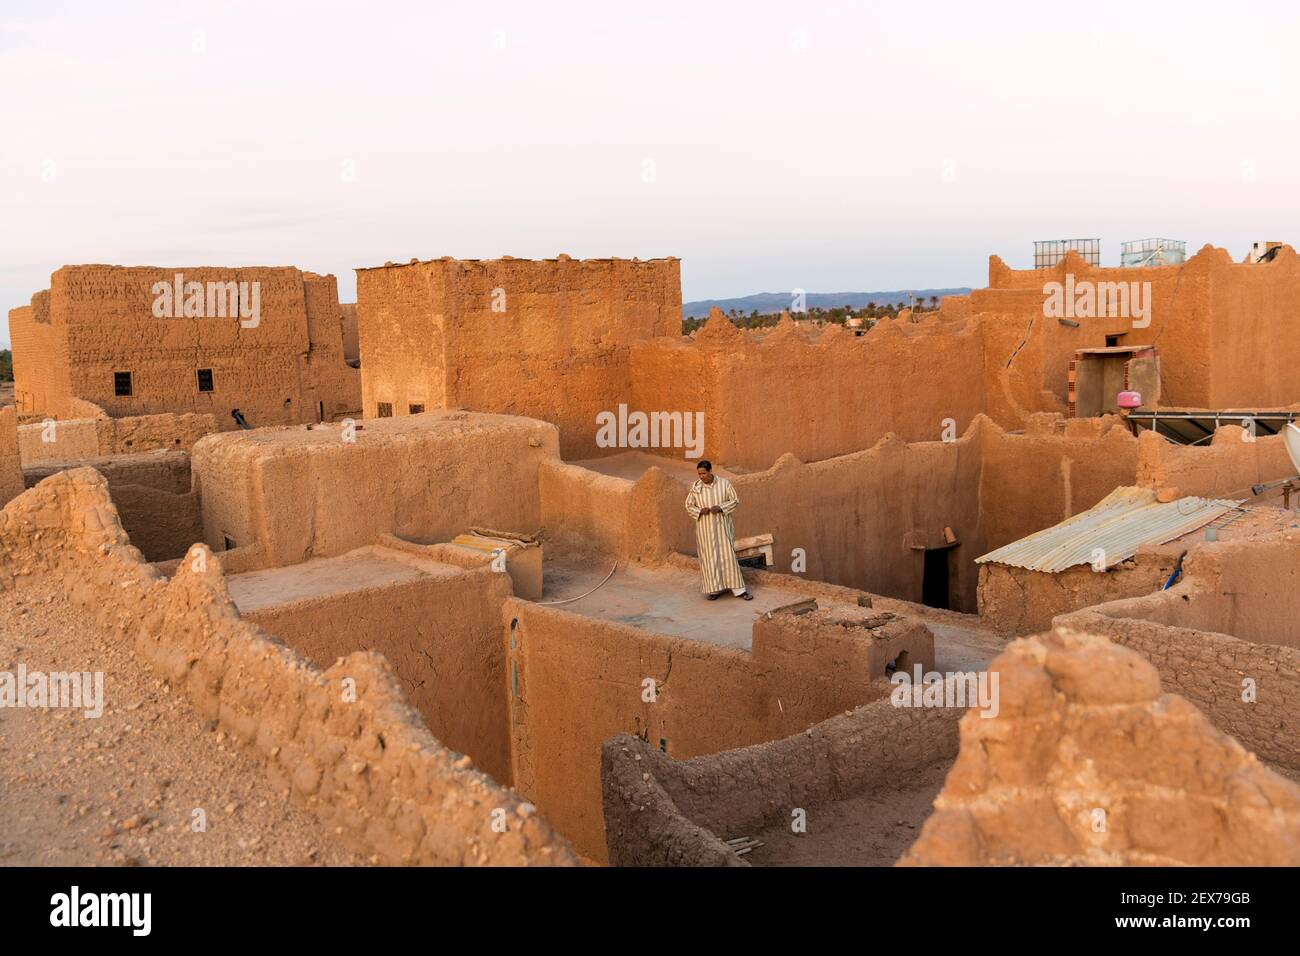 Morocco, Tinejdad, Todra Valley, Ksar El Khorbat, is a village of  fortified walls made of soil, lone man on roof top Stock Photo